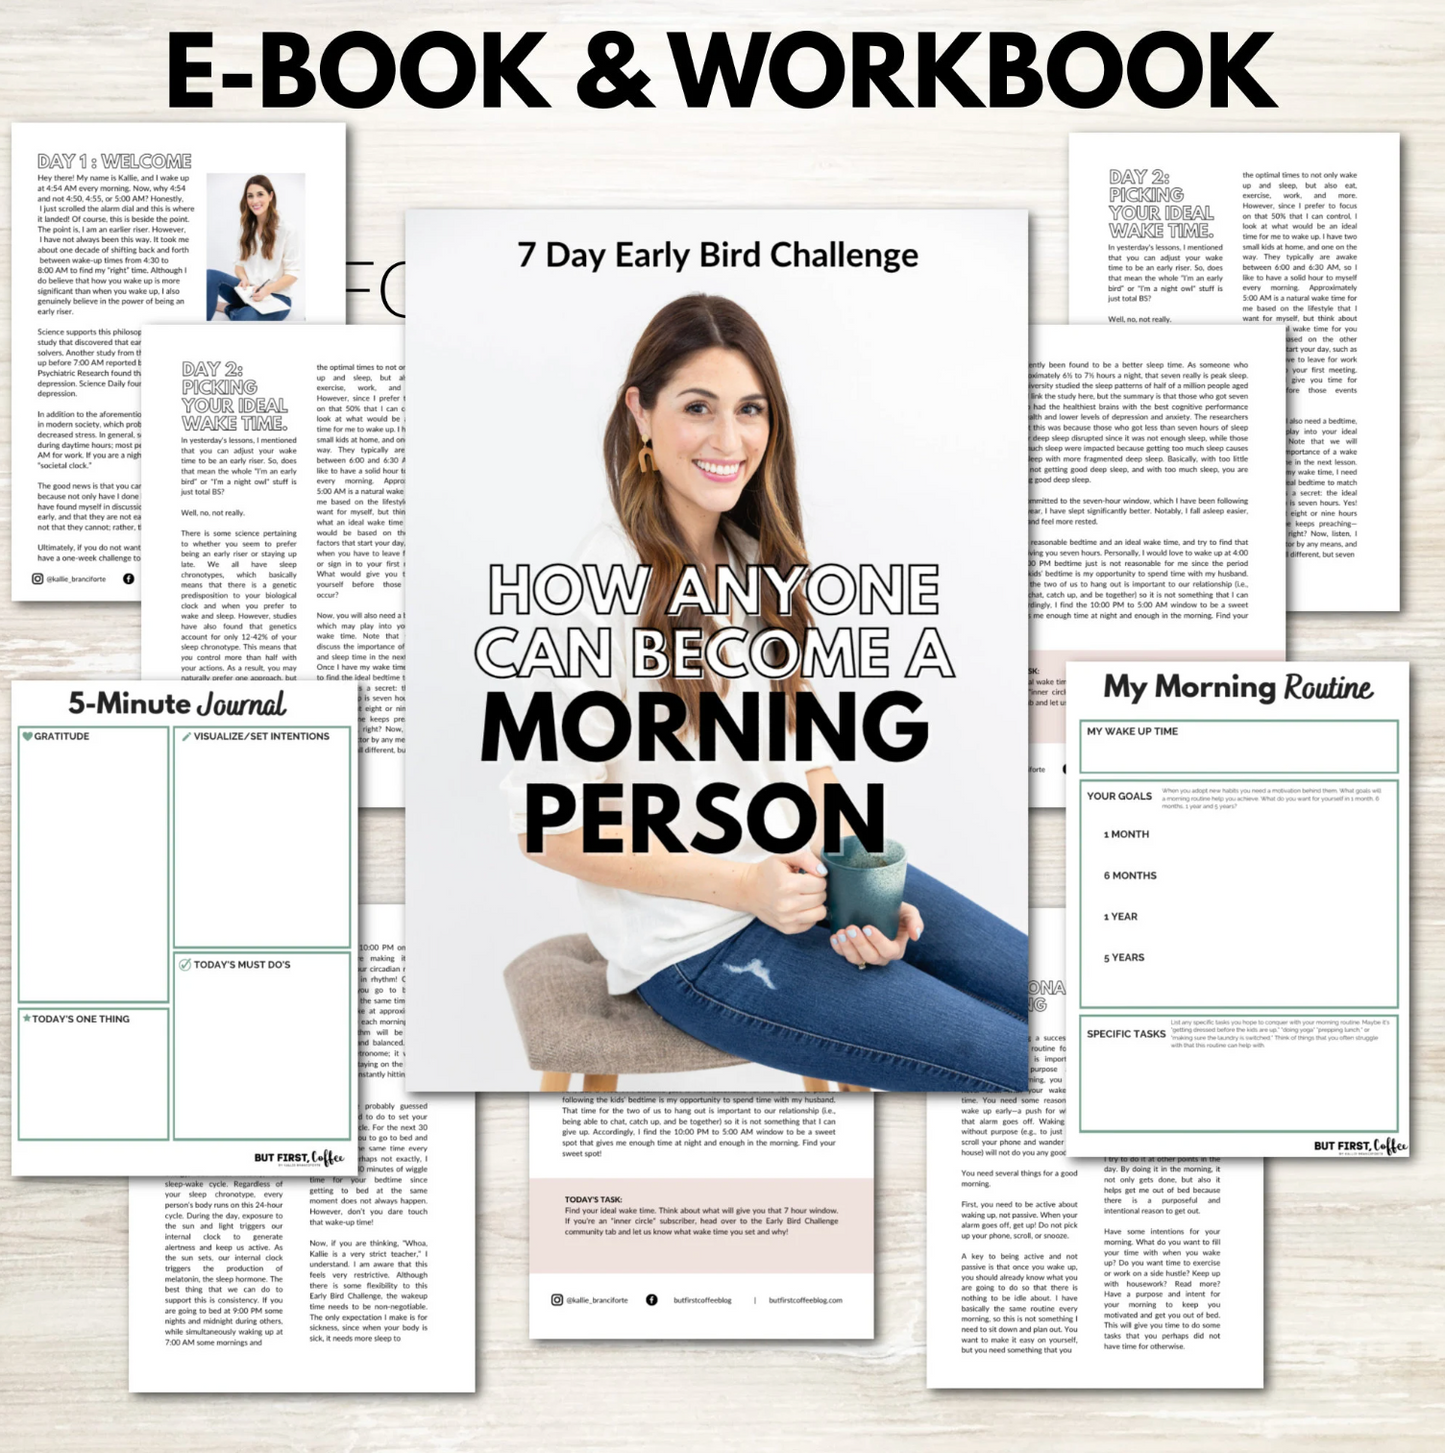 How to Become a Morning Person E-Book